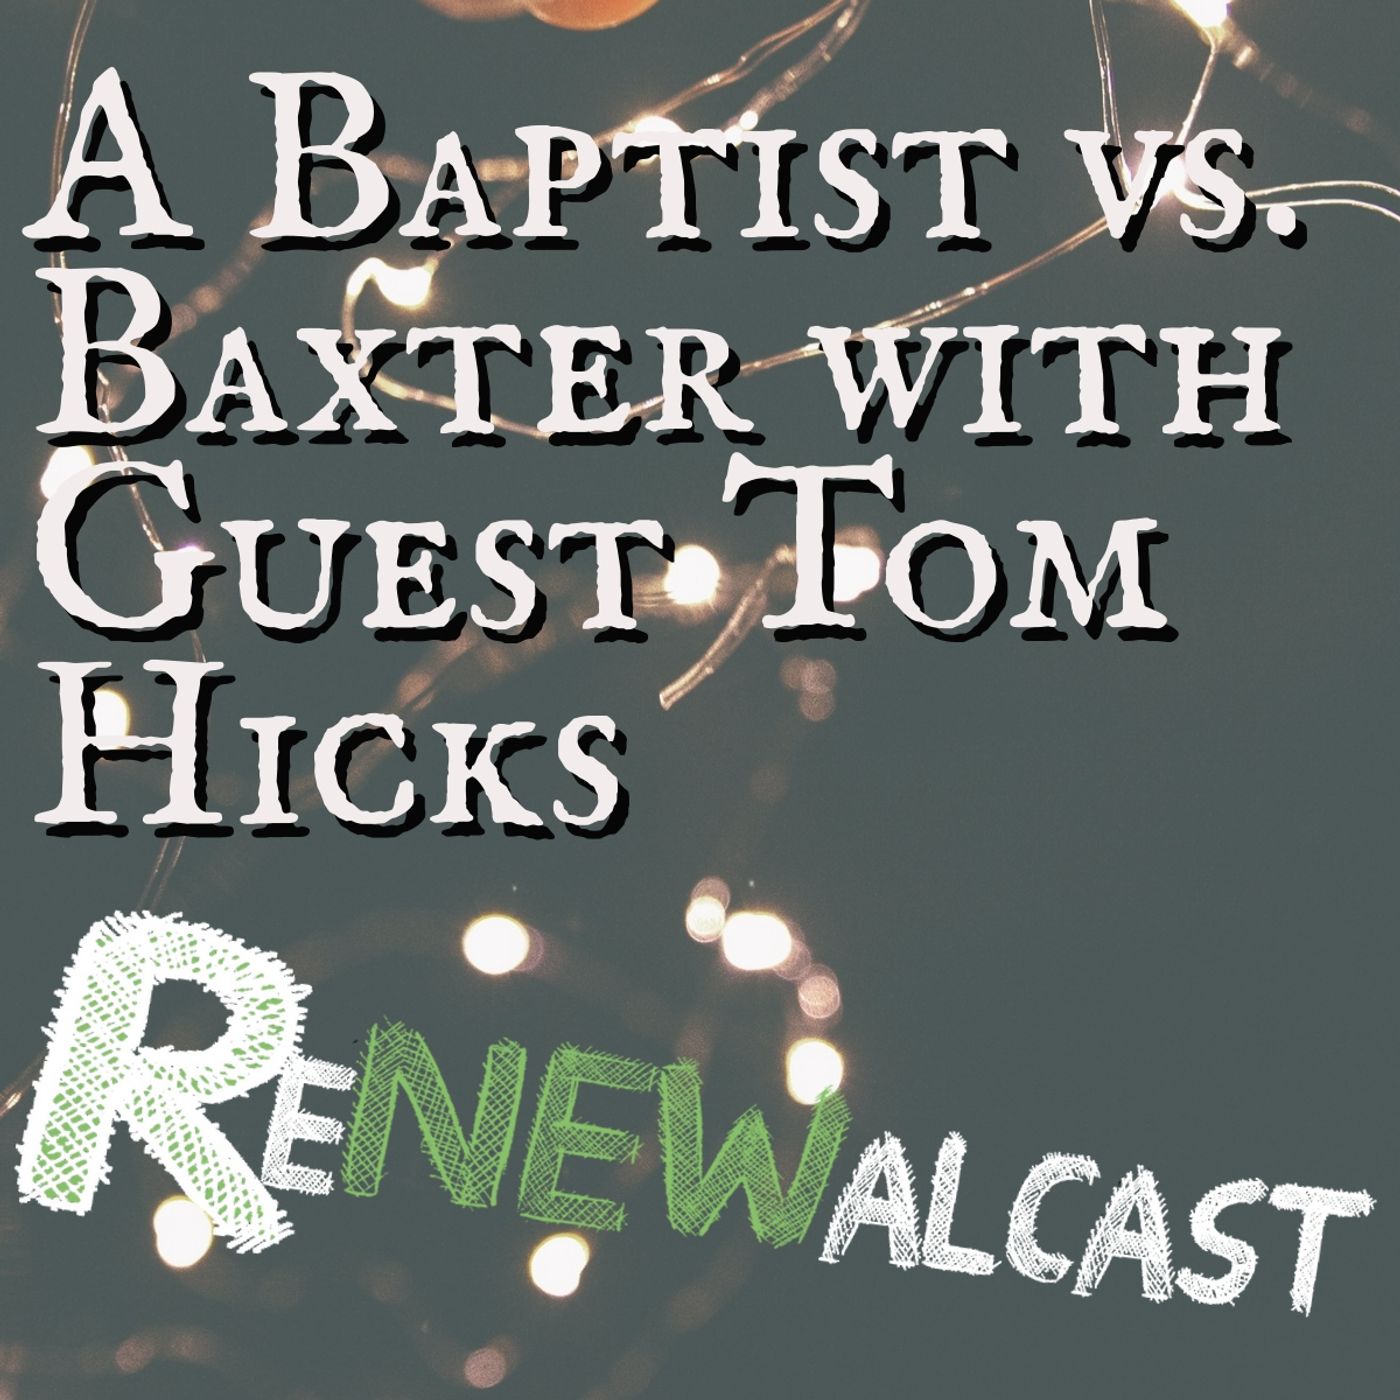 A Baptist vs. Baxter with Guest Tom Hicks